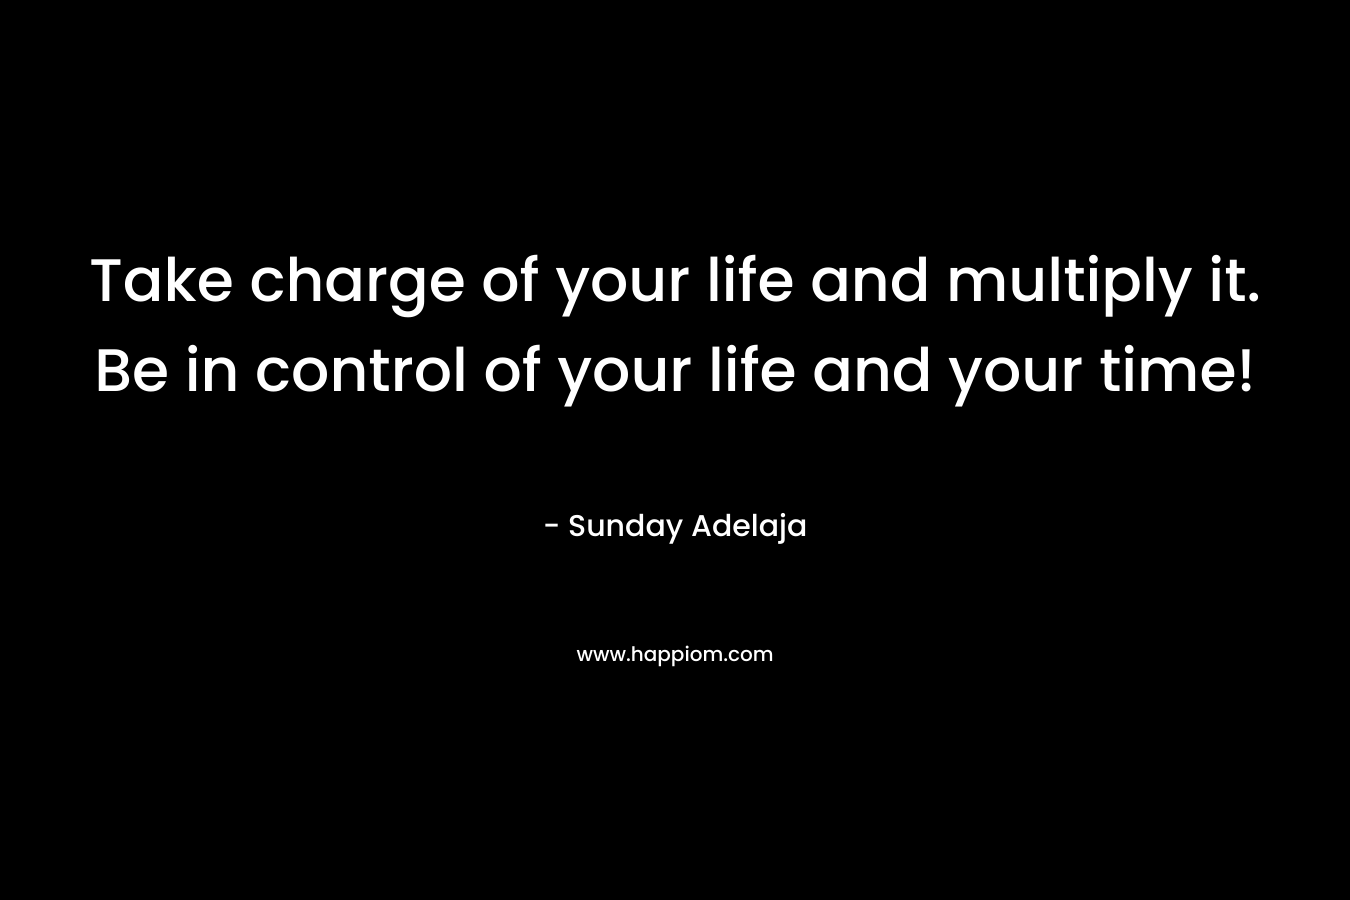 Take charge of your life and multiply it. Be in control of your life and your time!